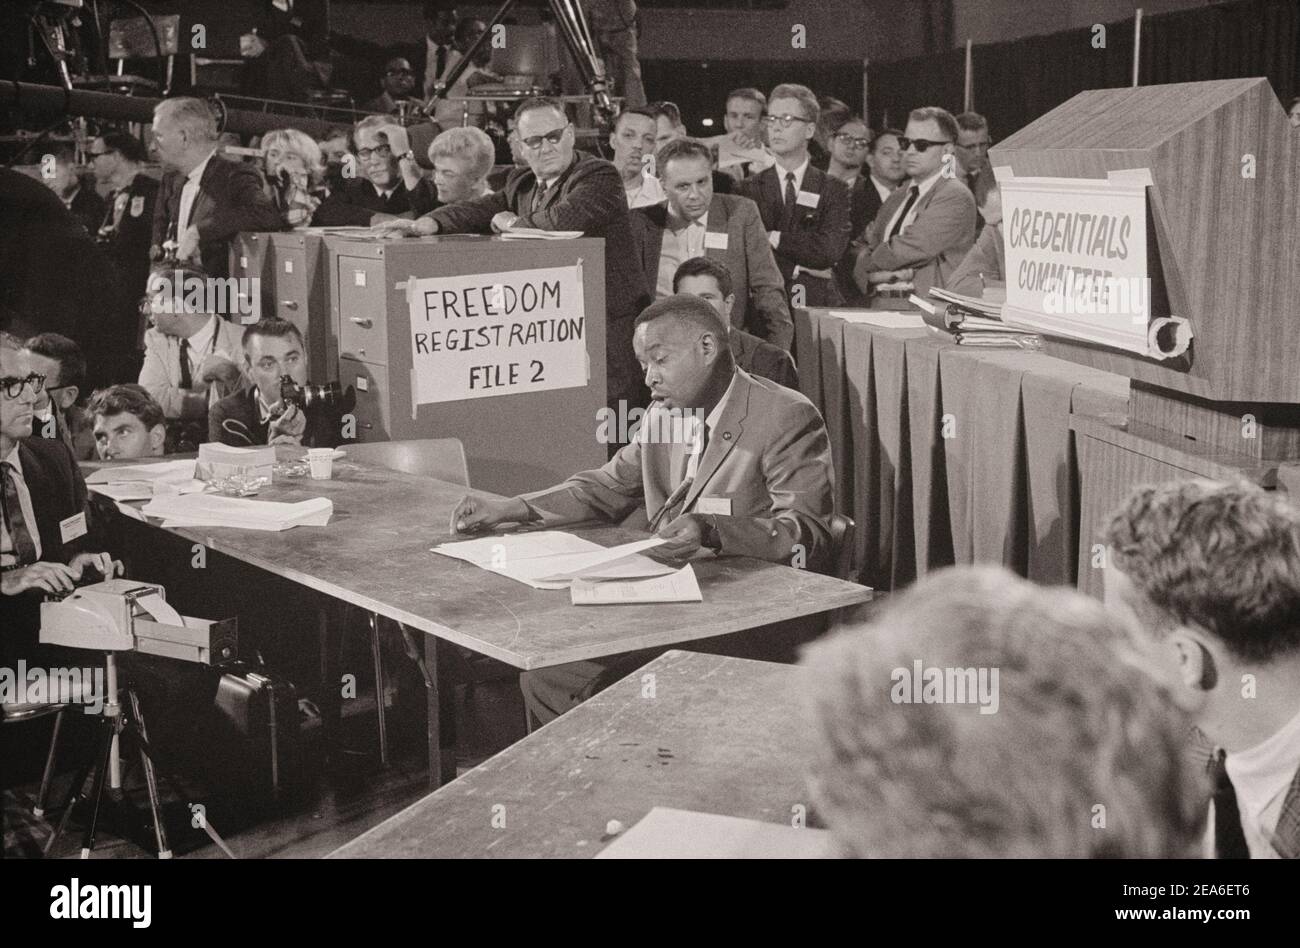 Aaron Henry, chair of the Mississippi Freedom Democratic Party delegation, speaks before the Credentials Committee at the Democratic National Conventi Stock Photo